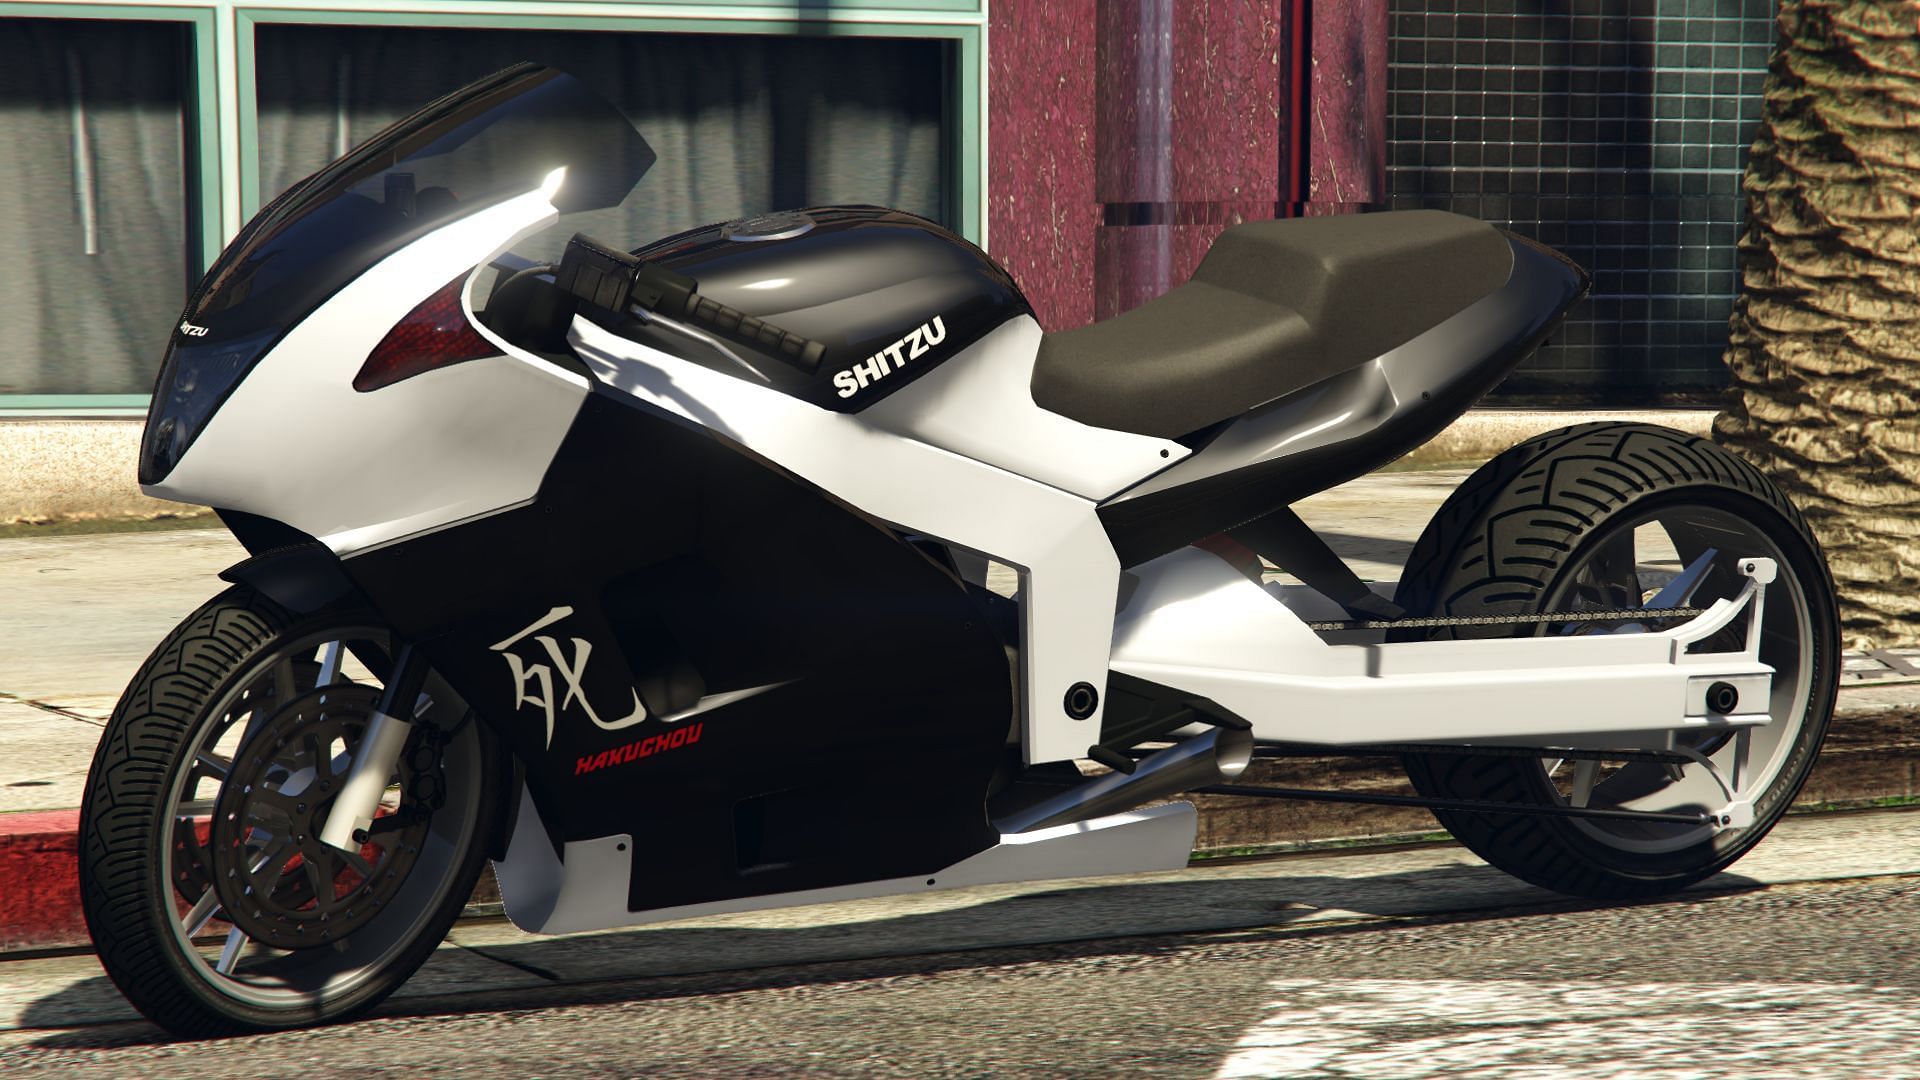 The Hakuchou Drag is the fastest of this bunch in GTA Online (Image via Rockstar Games)